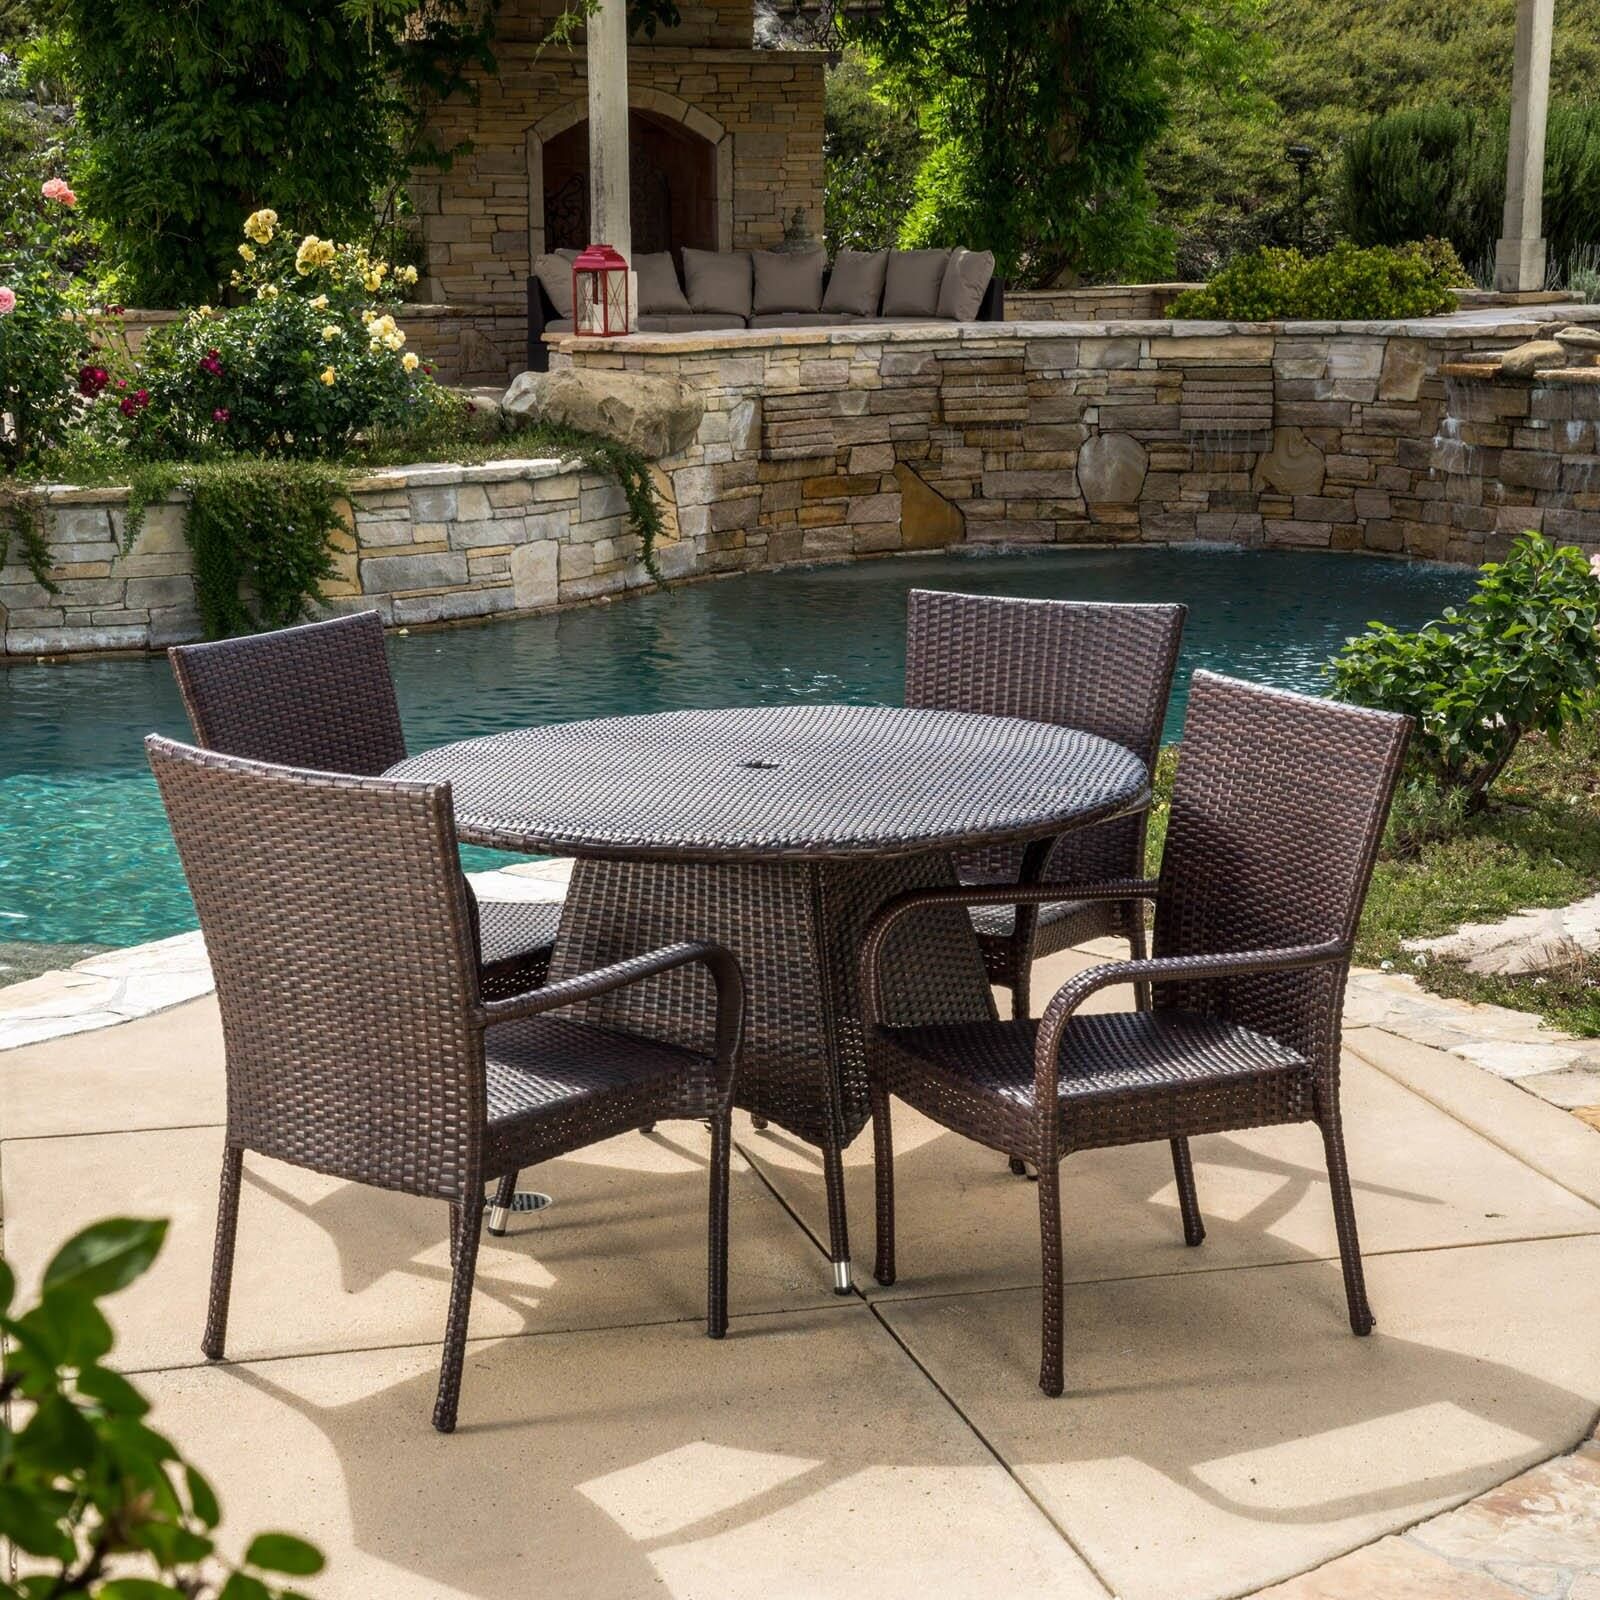 Potter Wicker 5 Piece Round Patio Dining Set – Walmart – Walmart With Regard To Wicker 5 Piece Round Patio Dining Sets (View 1 of 15)